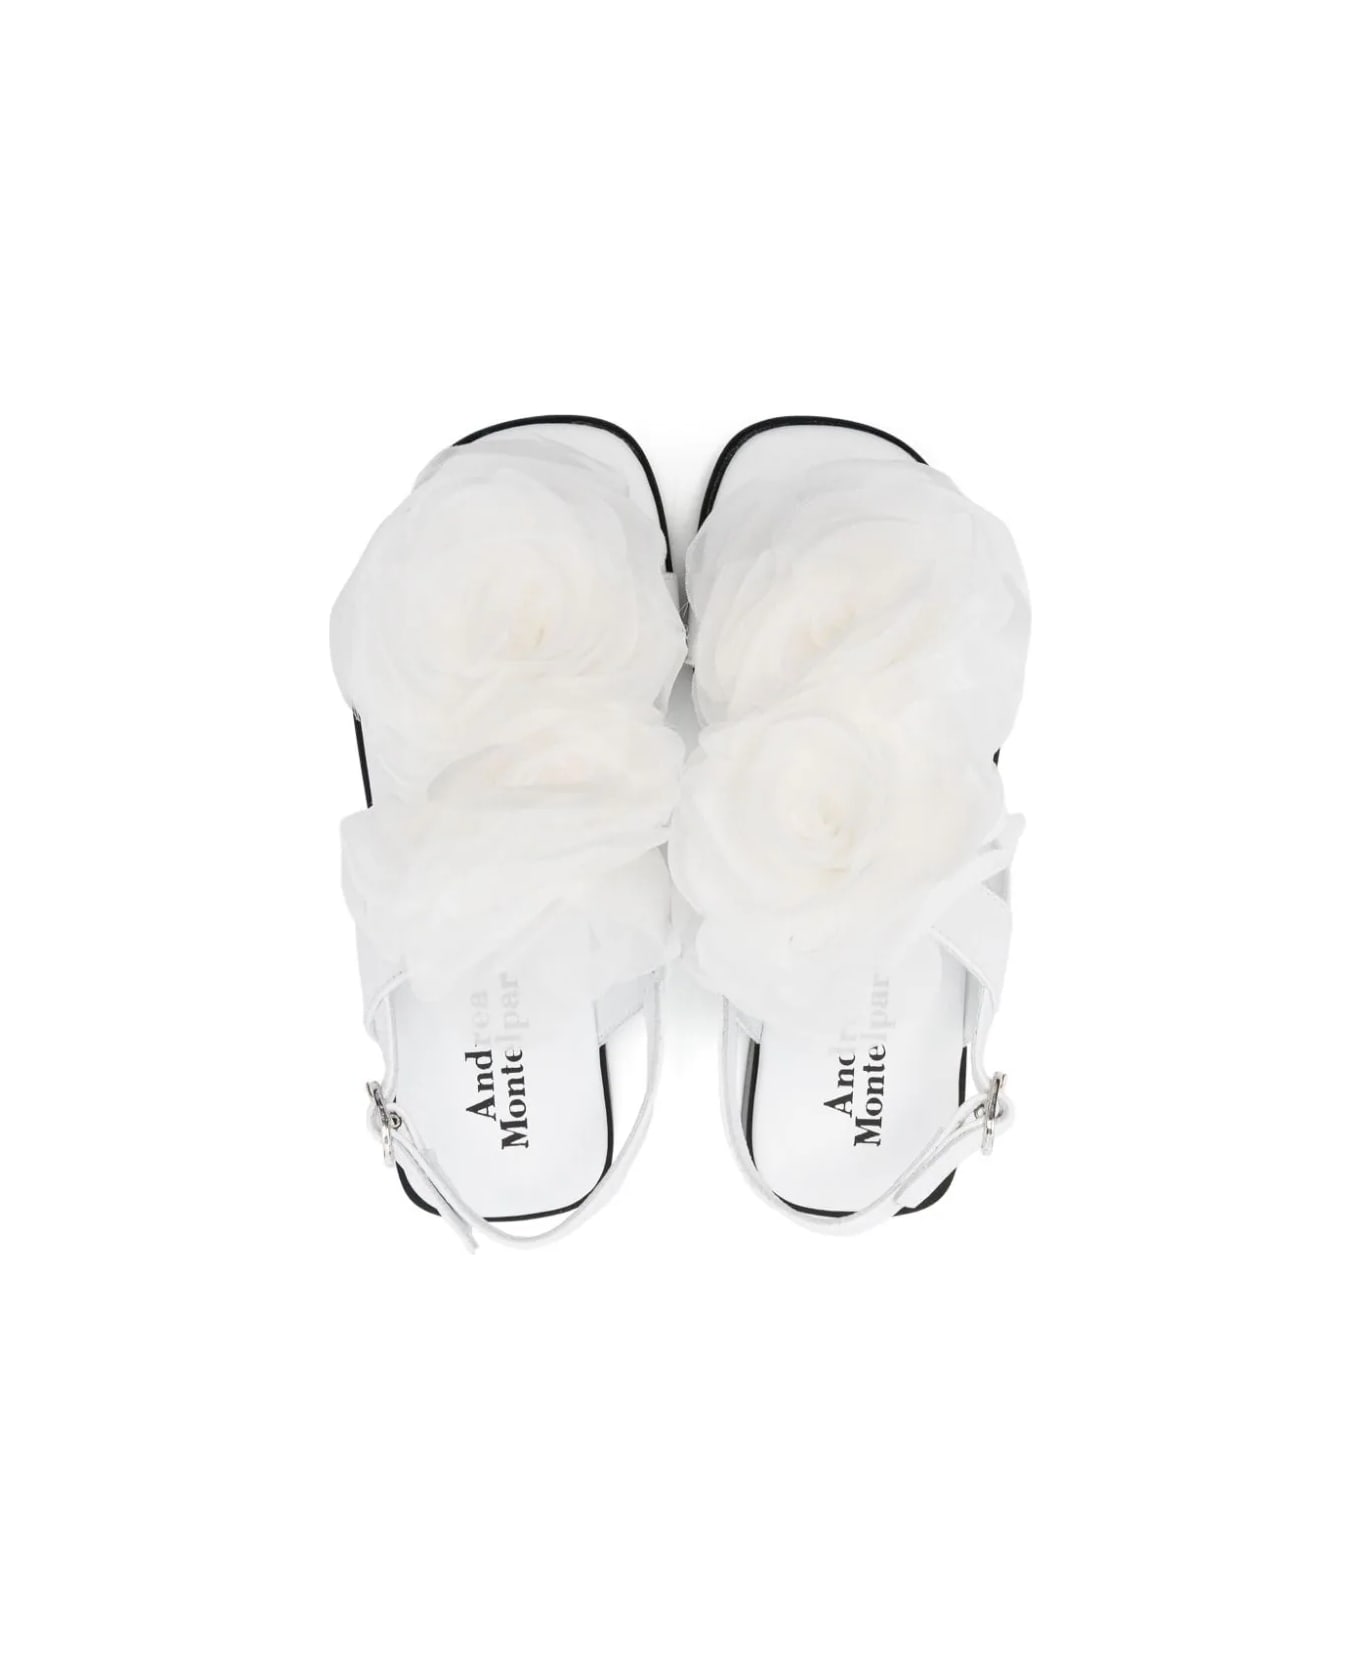 Andrea Montelpare Sandal With Applications - White